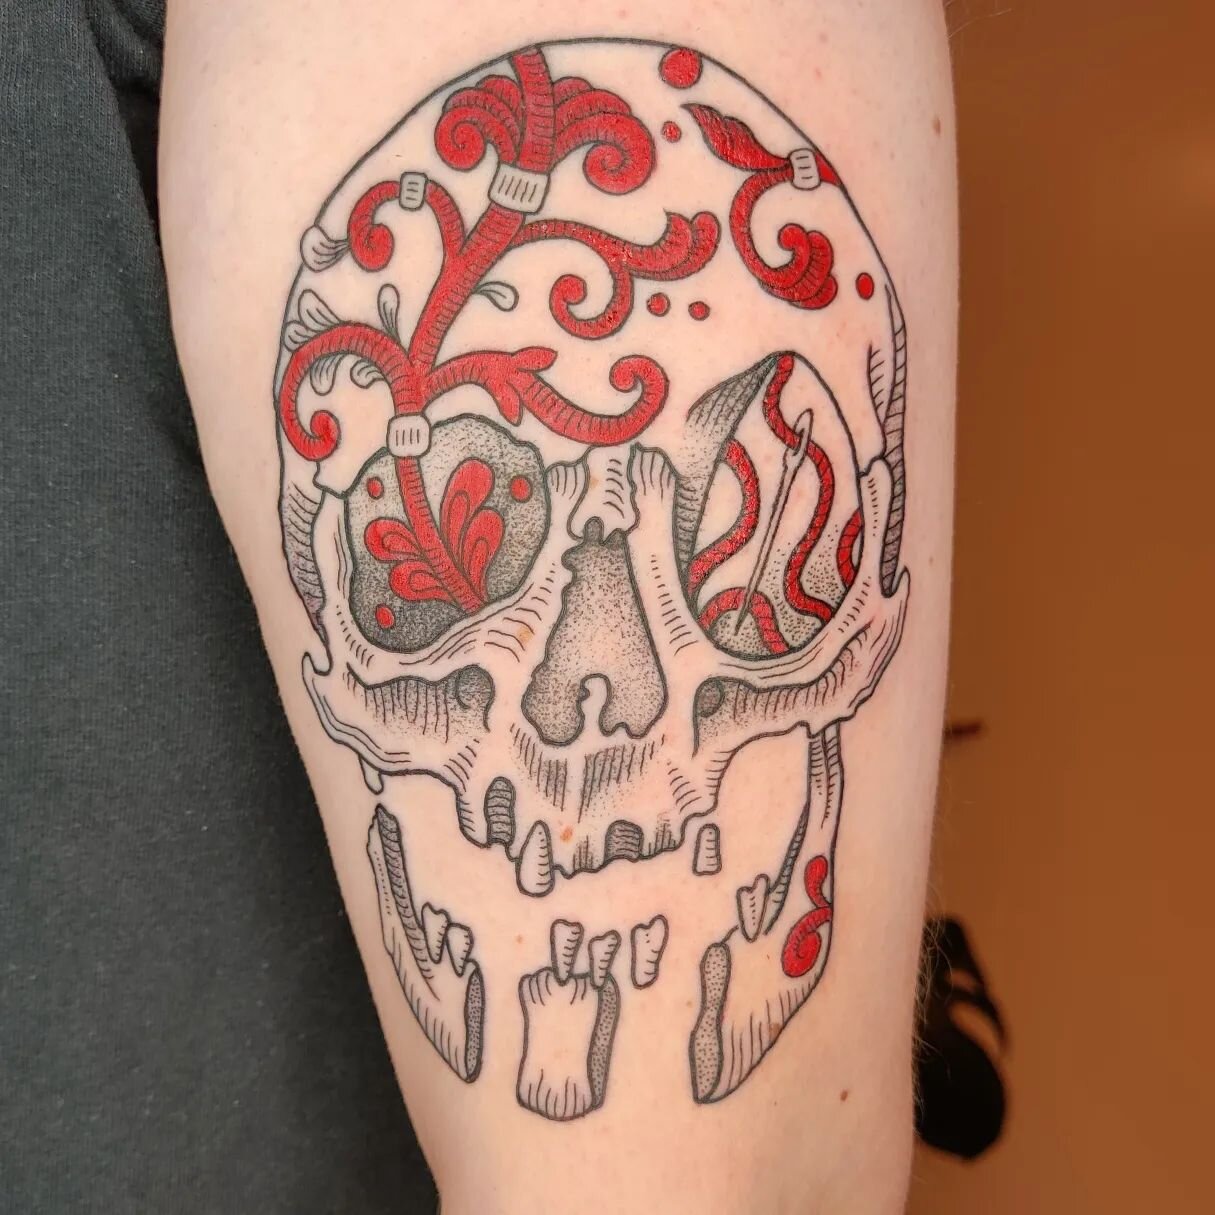 KOSCHEI THE DEATHLESS!!! If you can tell me where his soul is hidden in the picture I'll give you one of my sticker sets. Huge thank you to the brilliant Bj&oslash;rnar who always comes to me with the best ideas 💀
.
.
...
#tattooed #tattoo #tattooer